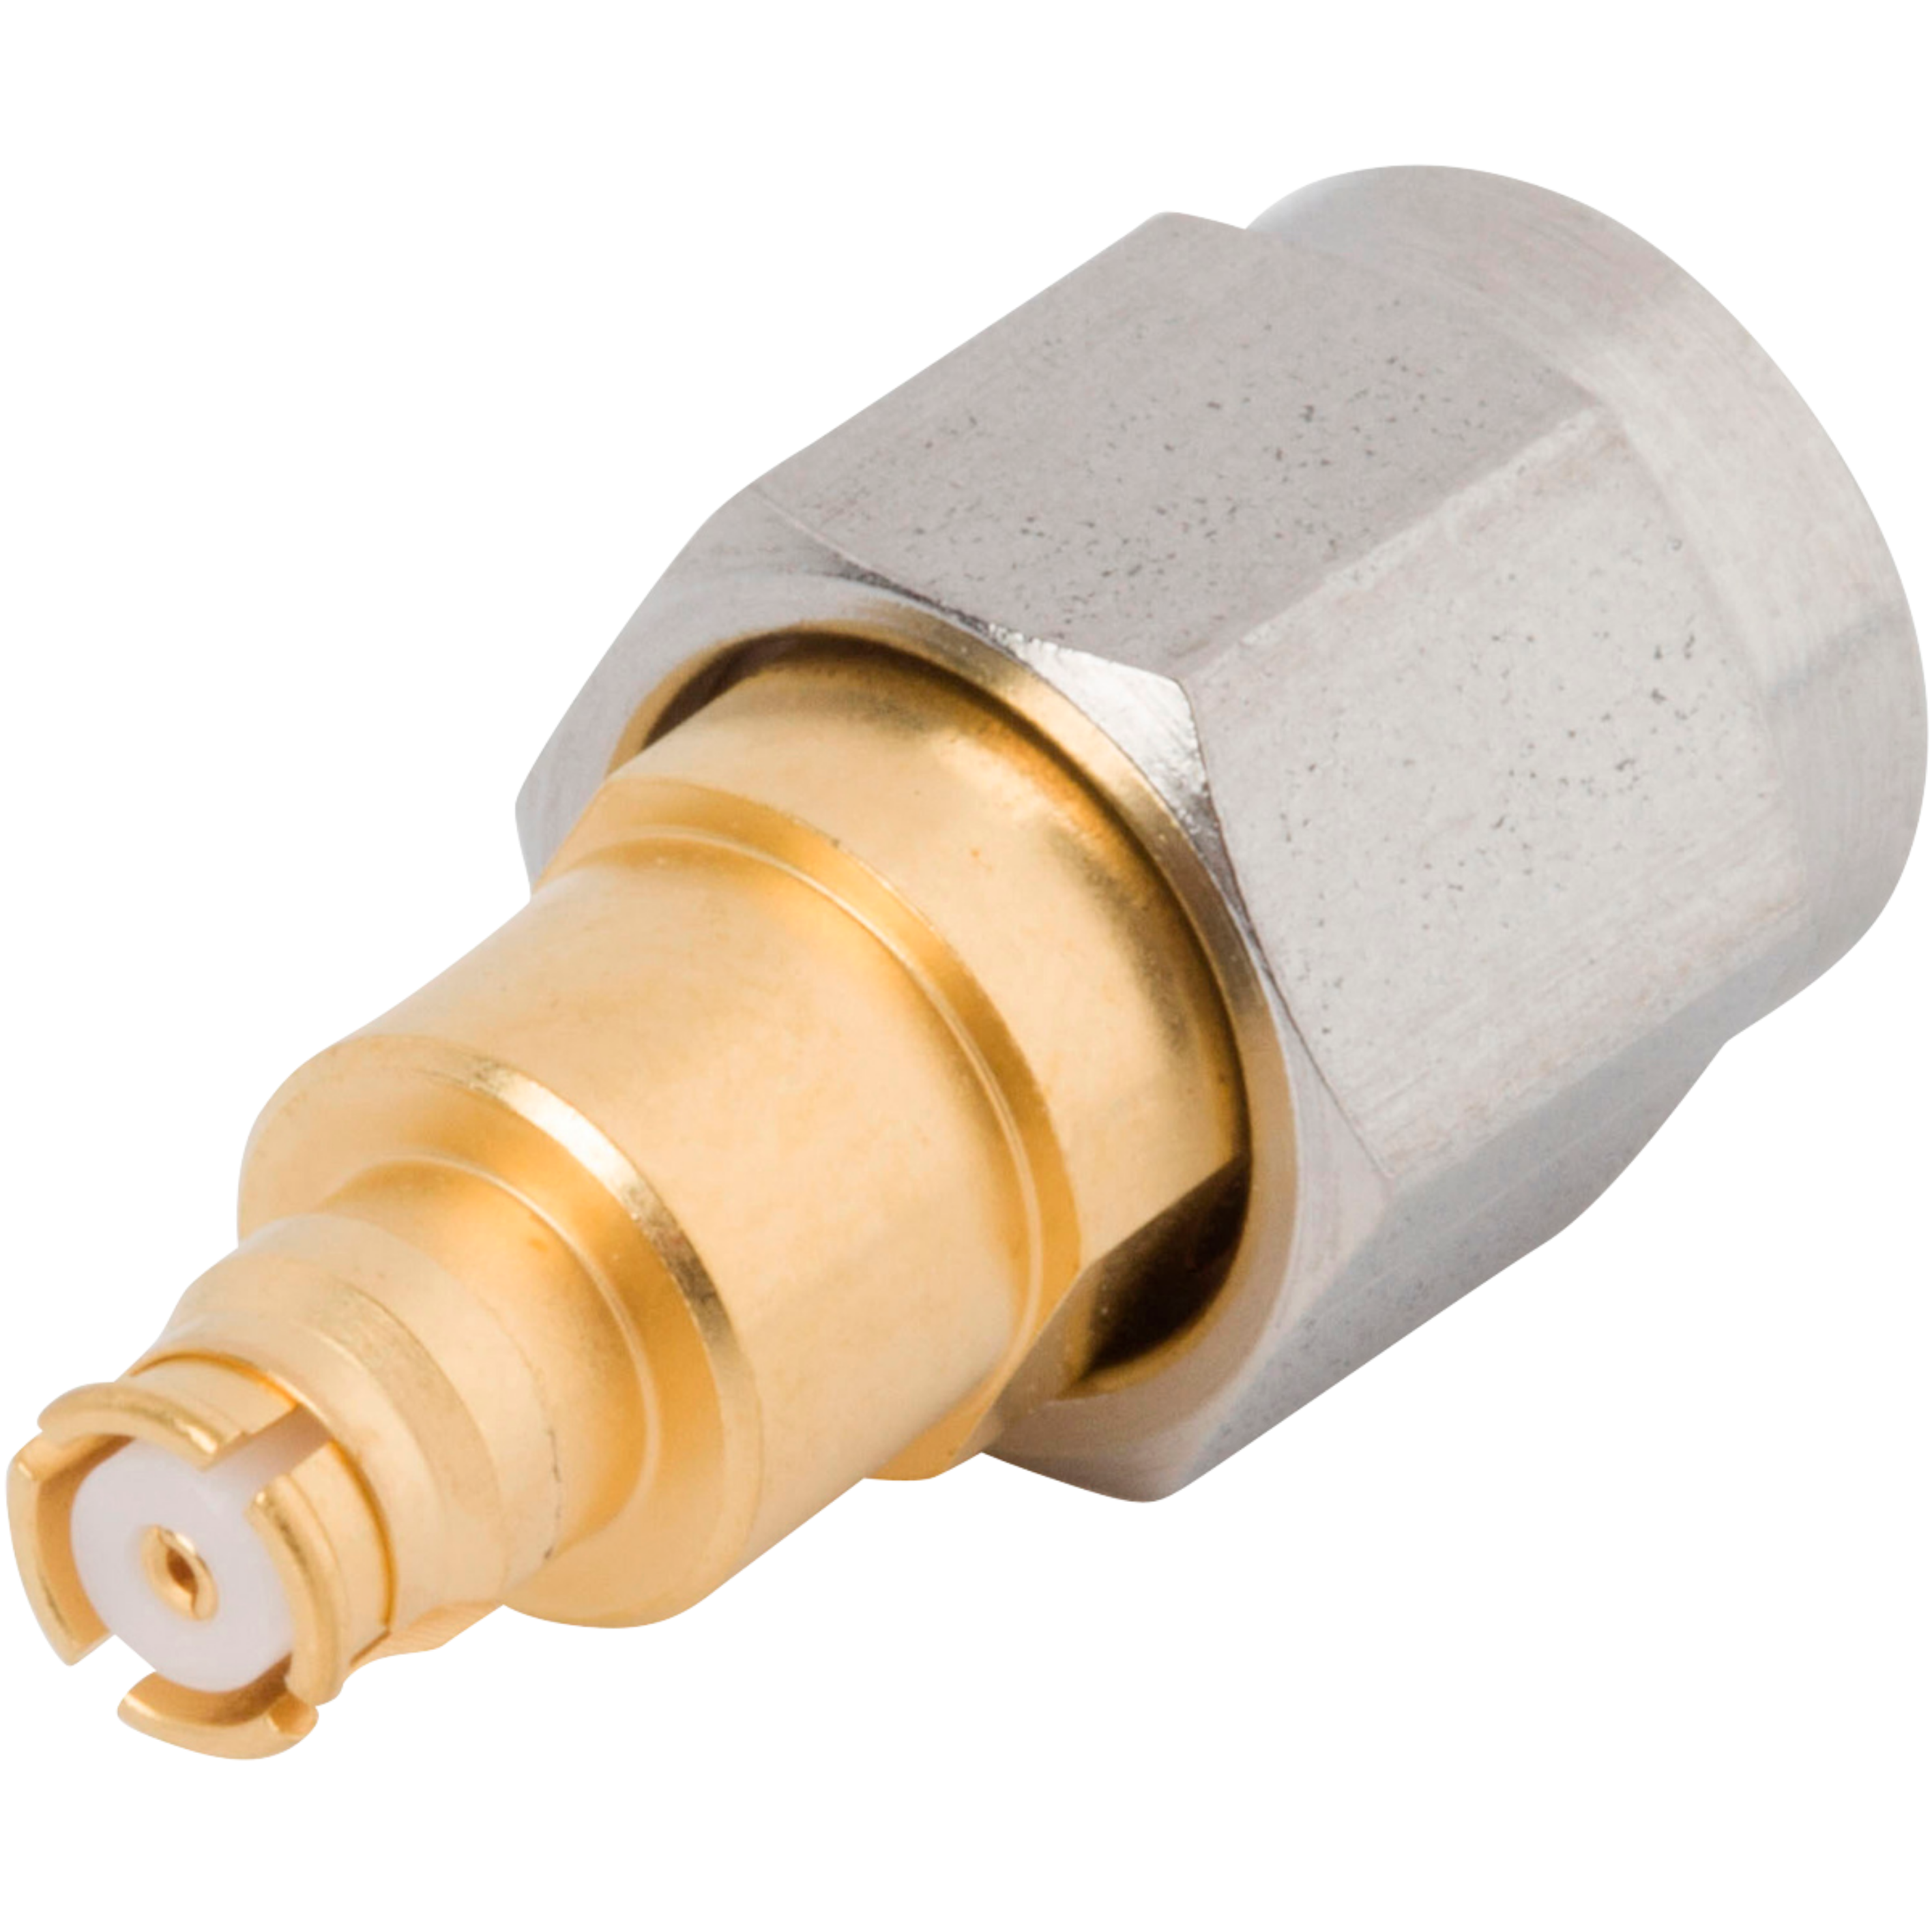 SMP Female to SMA Male Adapter, SF1129-6154